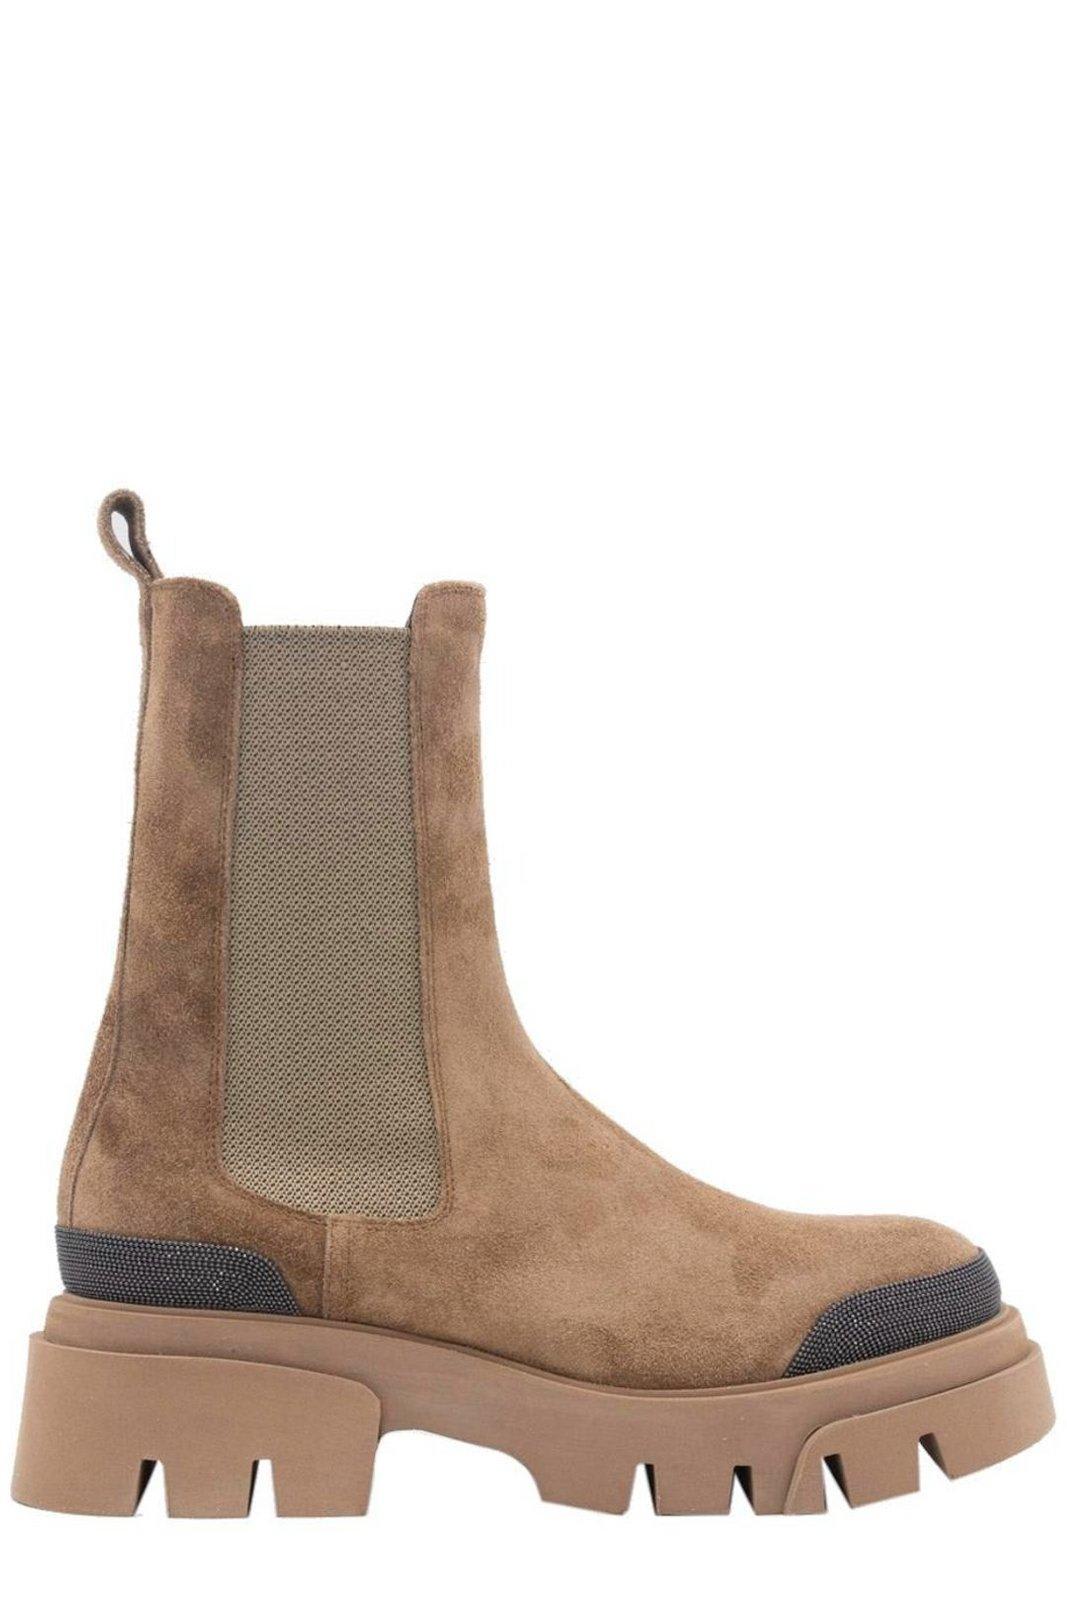 Brunello Cucinelli Panelled Ankle Boots